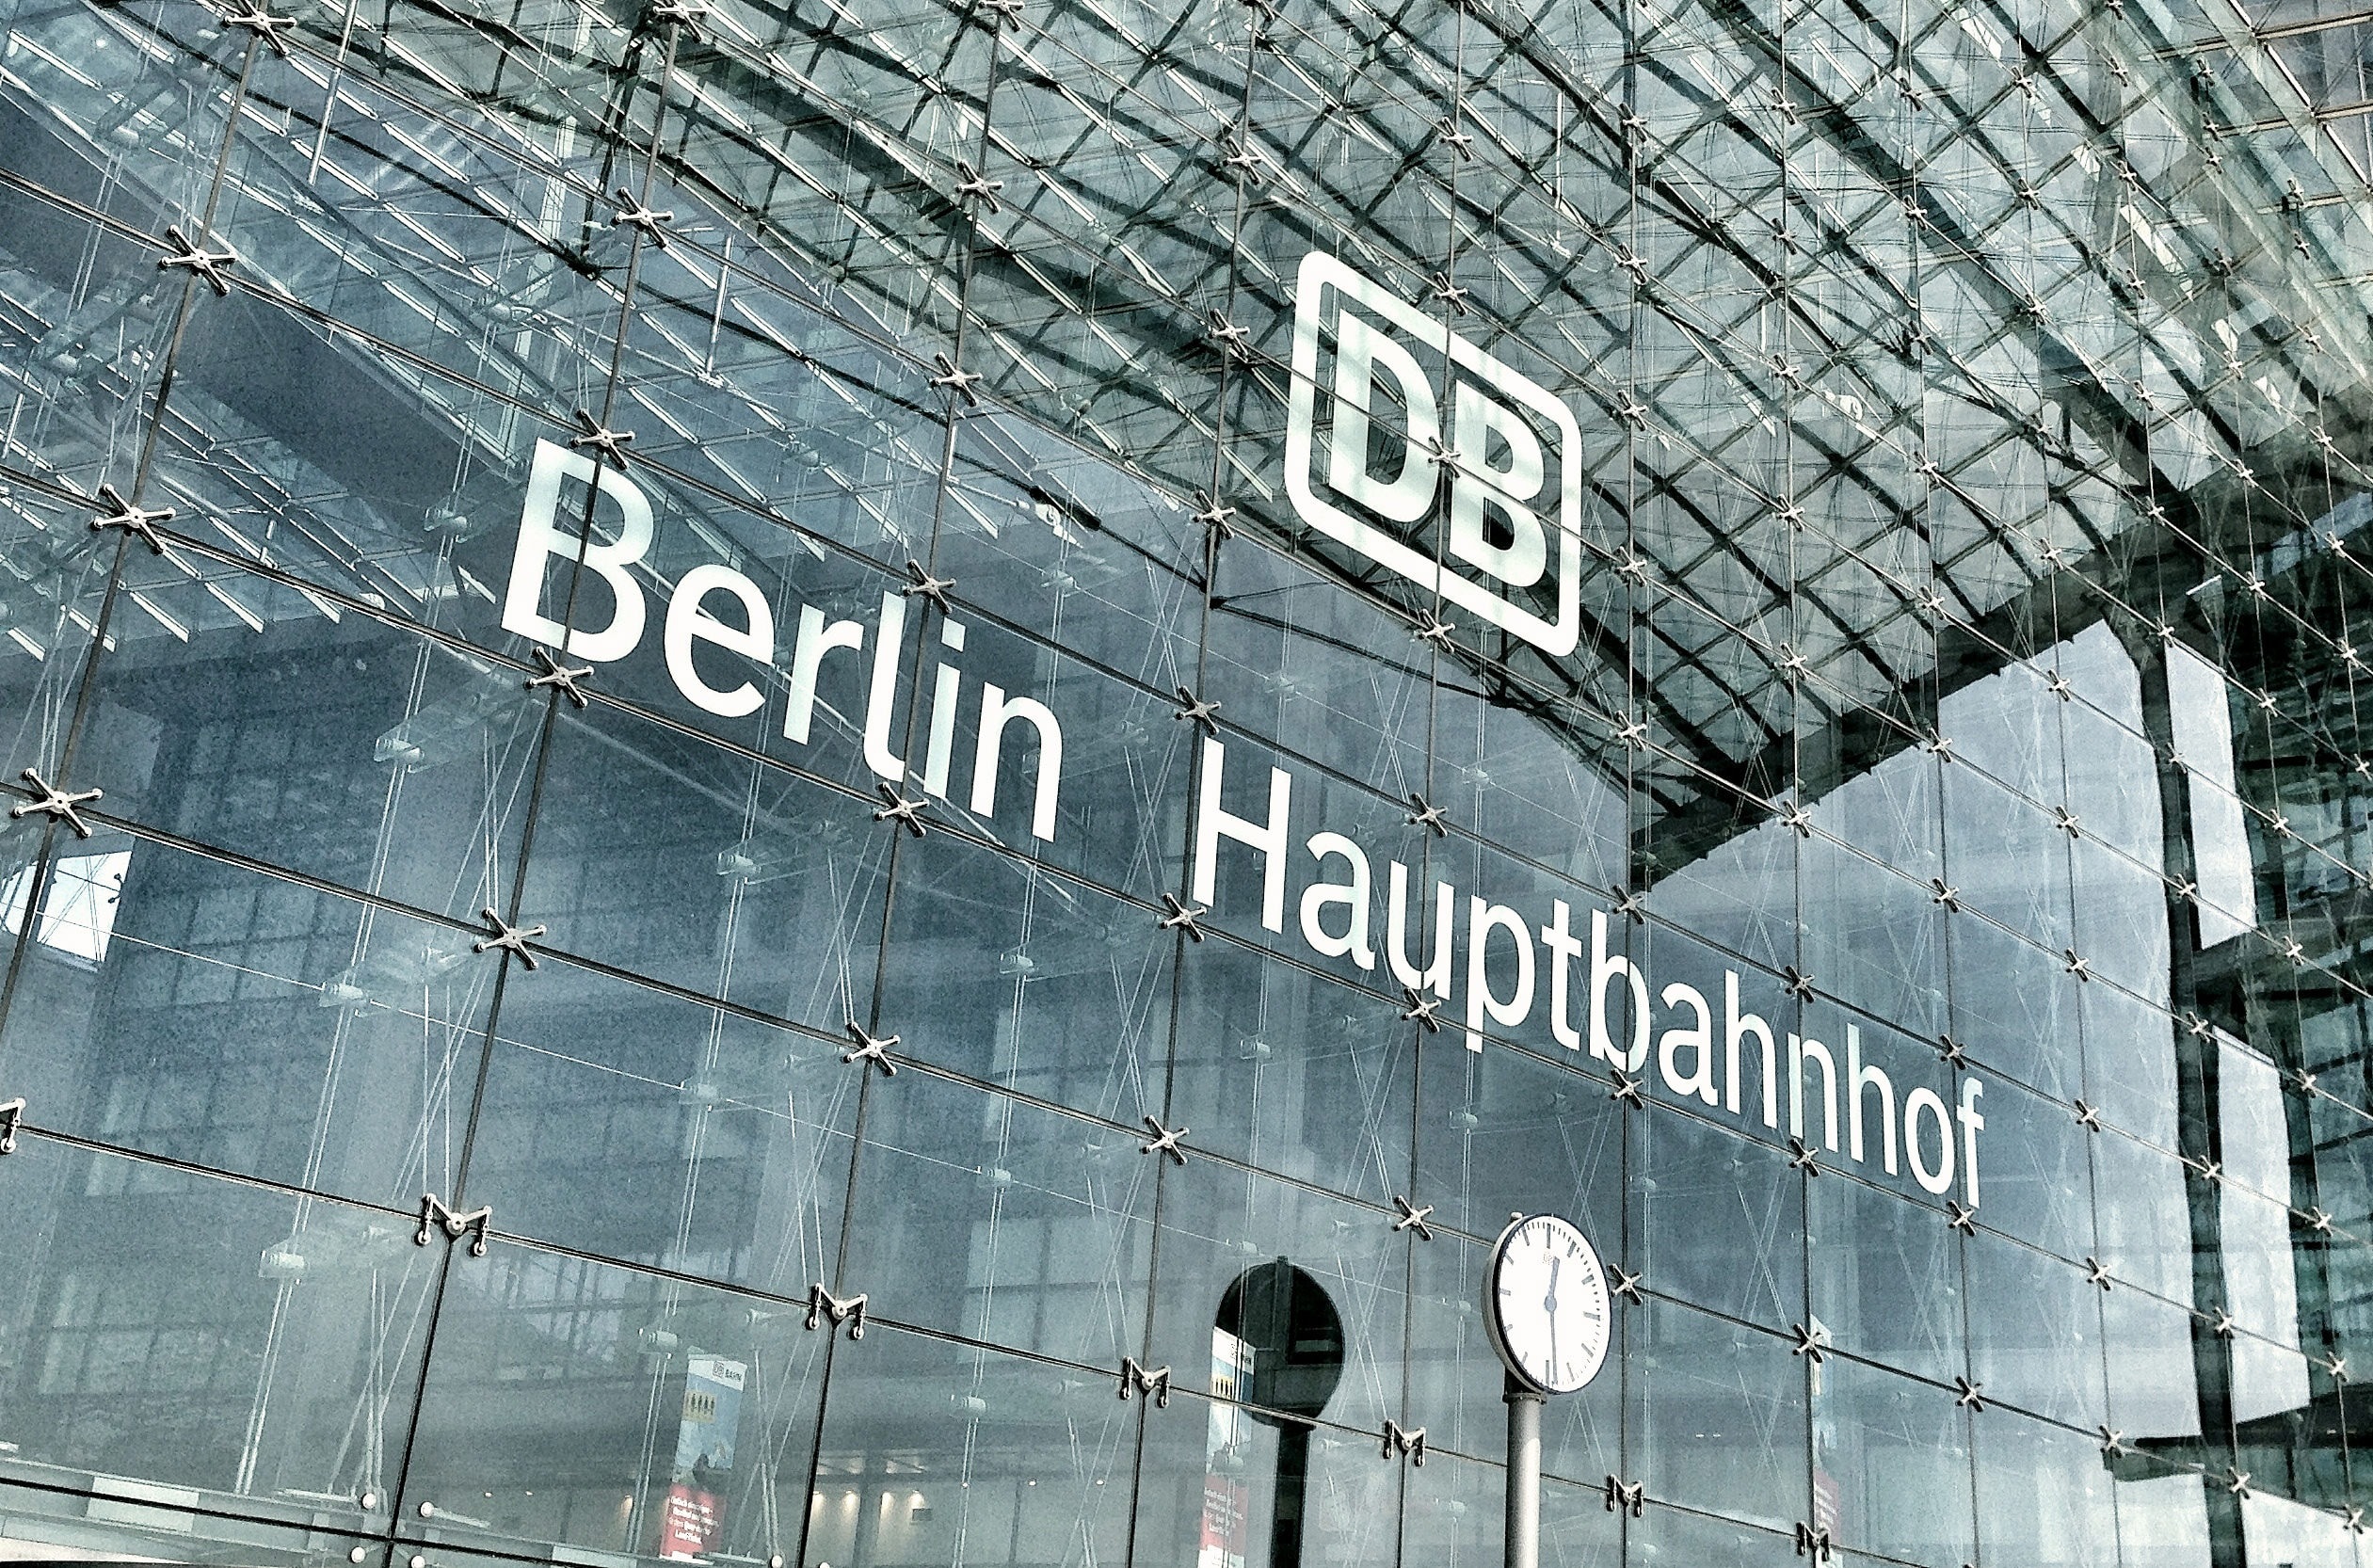 Central Station, Germany, Berlin, text, city